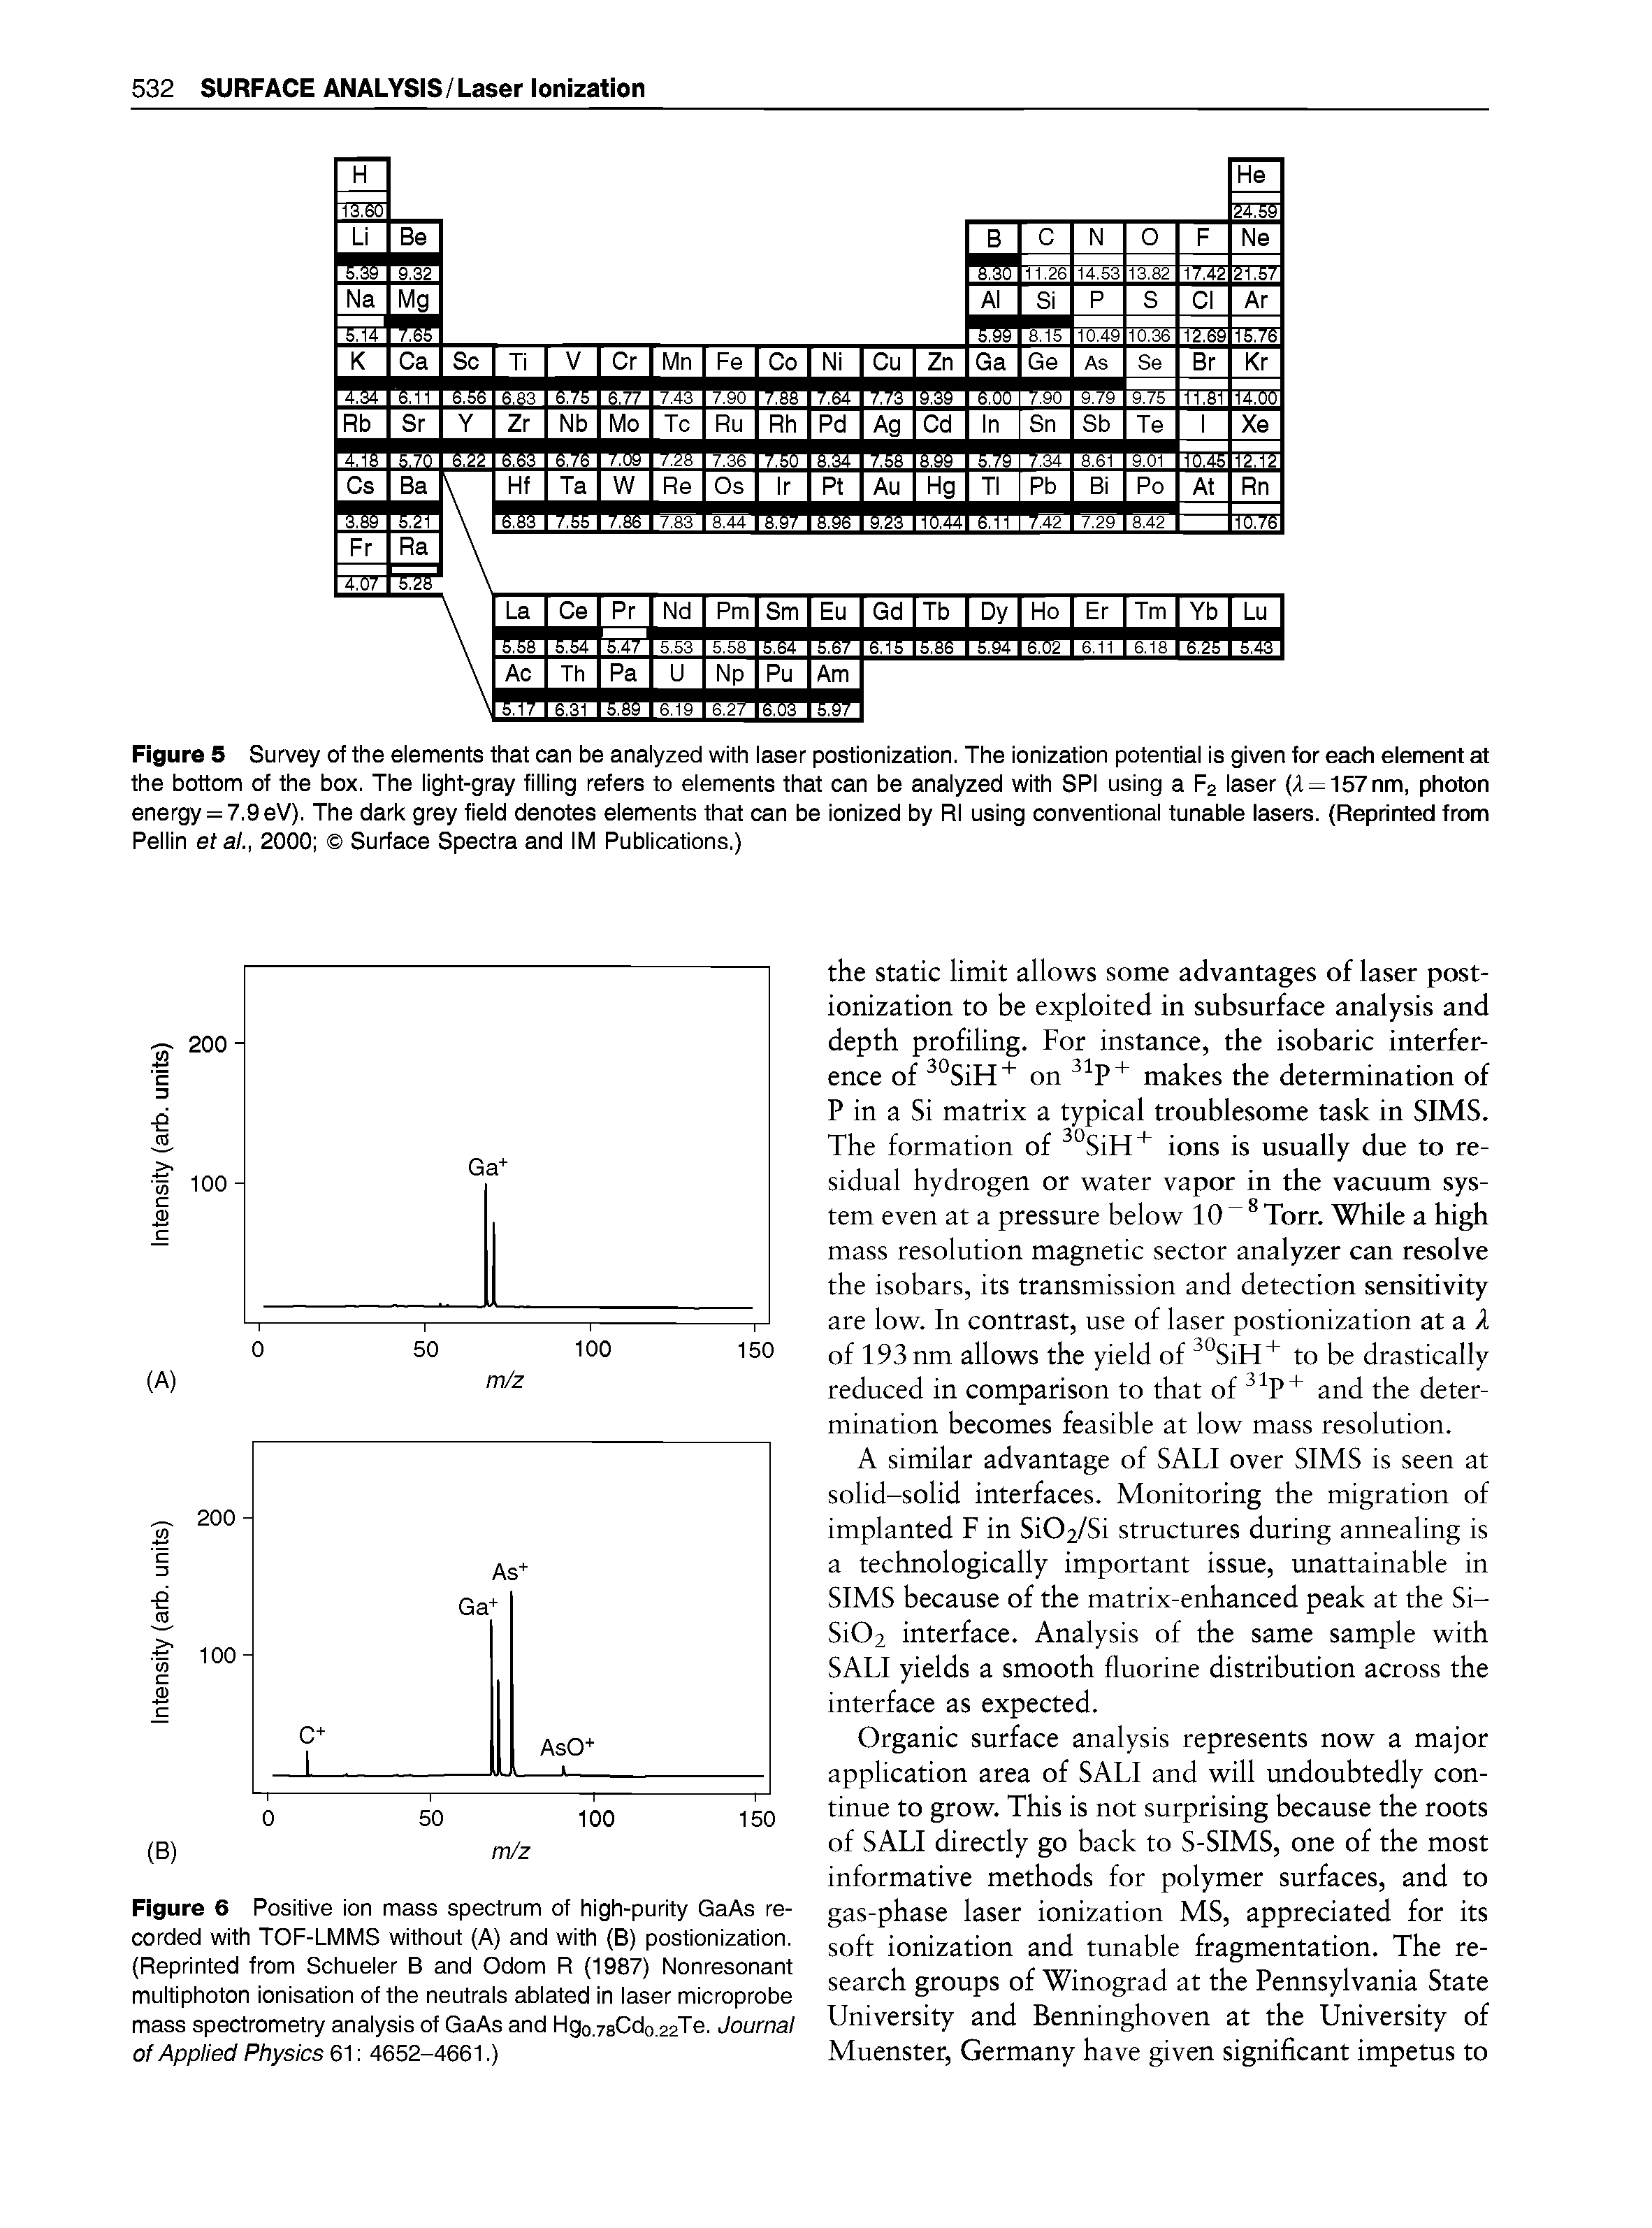 Figure 6 Positive ion mass spectrum of high-purity GaAs recorded with TOF-LMMS without (A) and with (B) postionization. (Reprinted from Schueler B and Odom R (1987) Nonresonant multiphoton ionisation of the neutrals ablated In laser microprobe mass spectrometry analysis of GaAs and Hgo.78Cdo.22Te. Journal of Applied Physics 61 4652-4661.)...